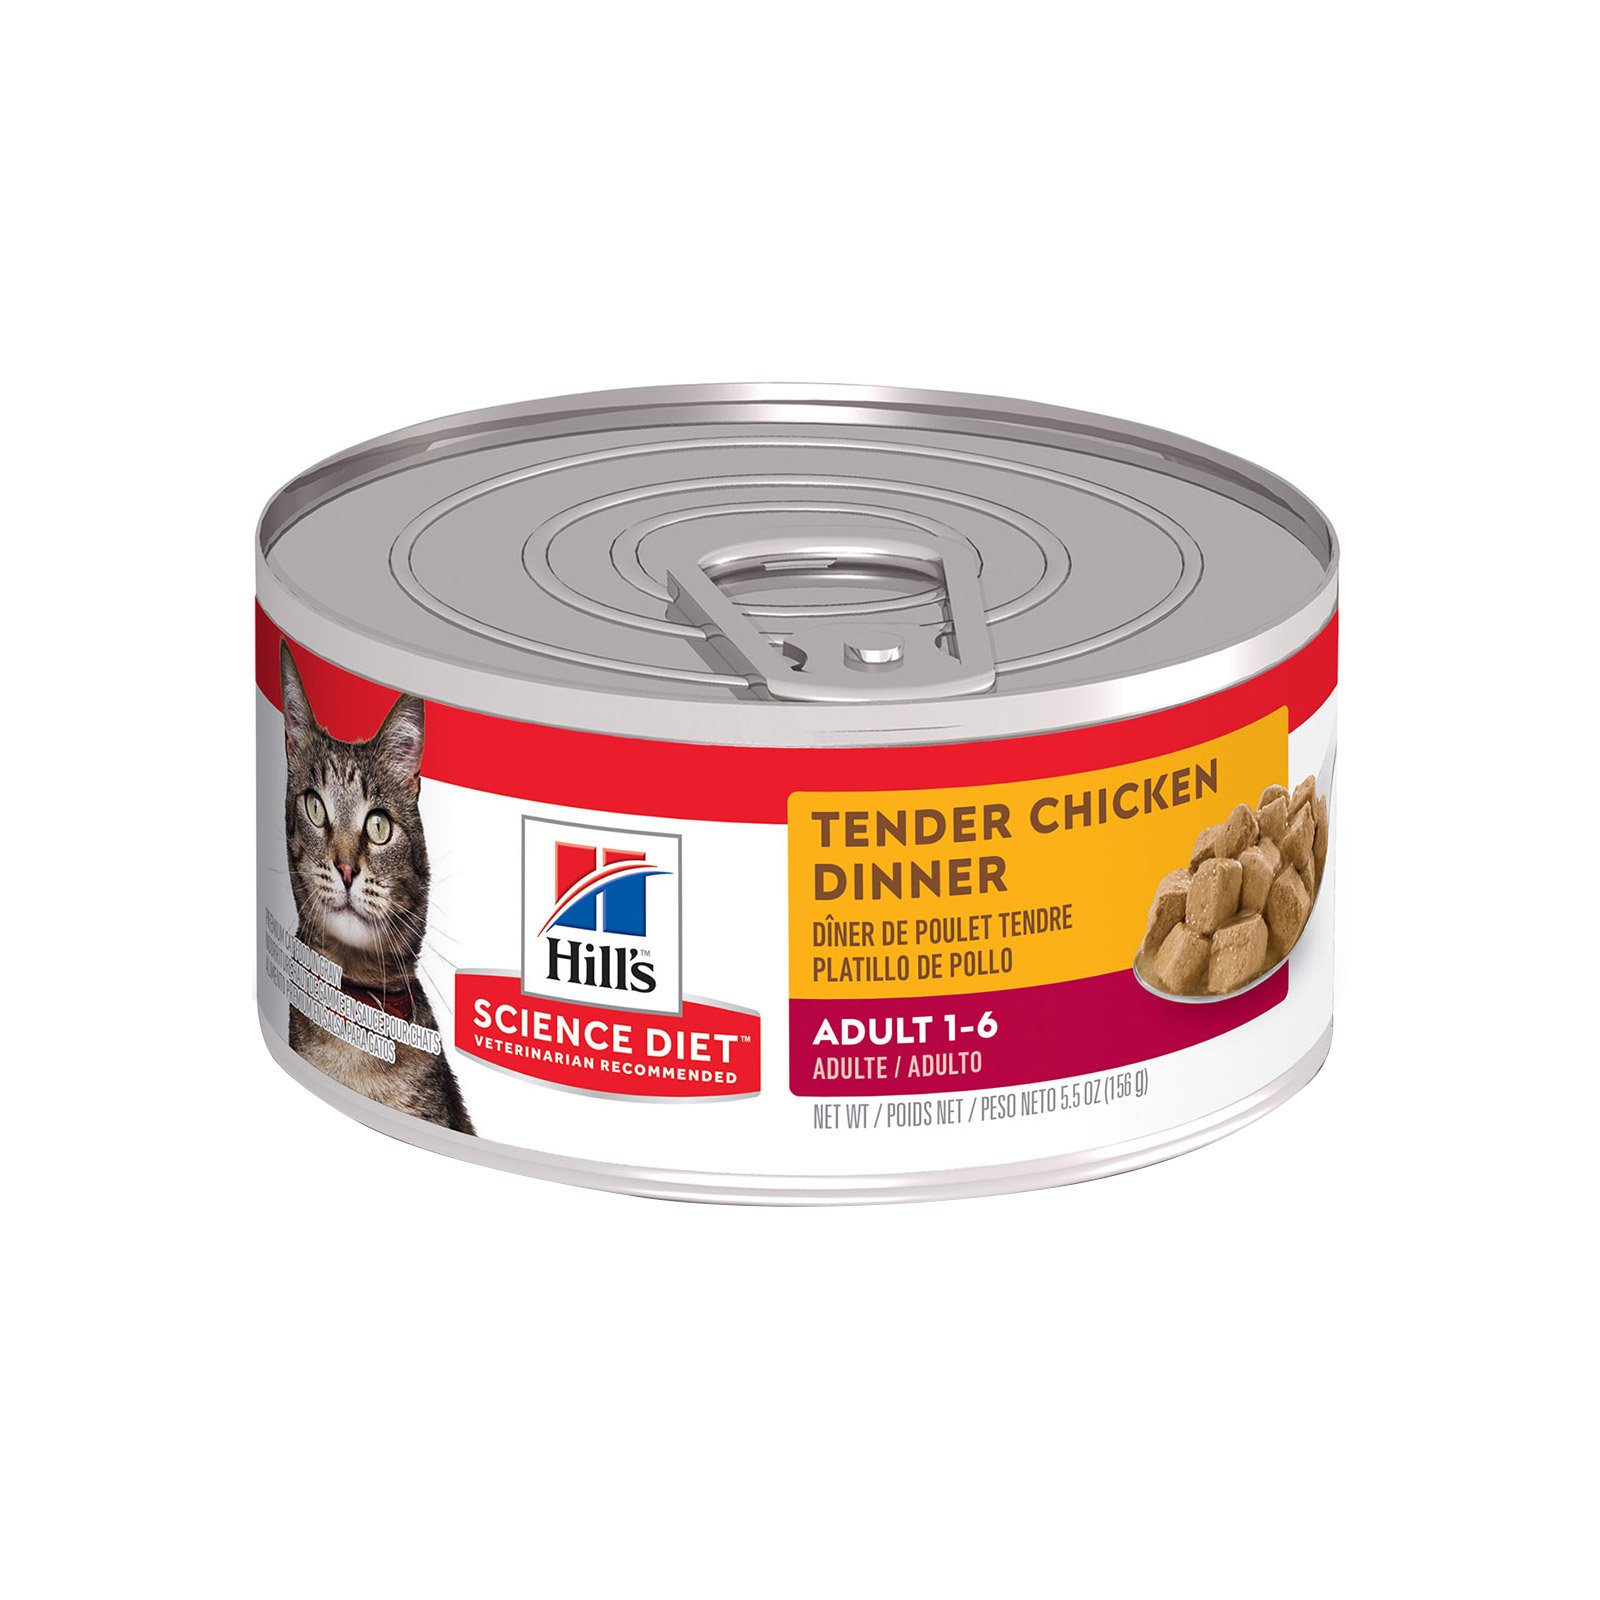 Hill's Science Diet Adult Tender Chicken Dinner Canned Wet Cat Food 156 gm